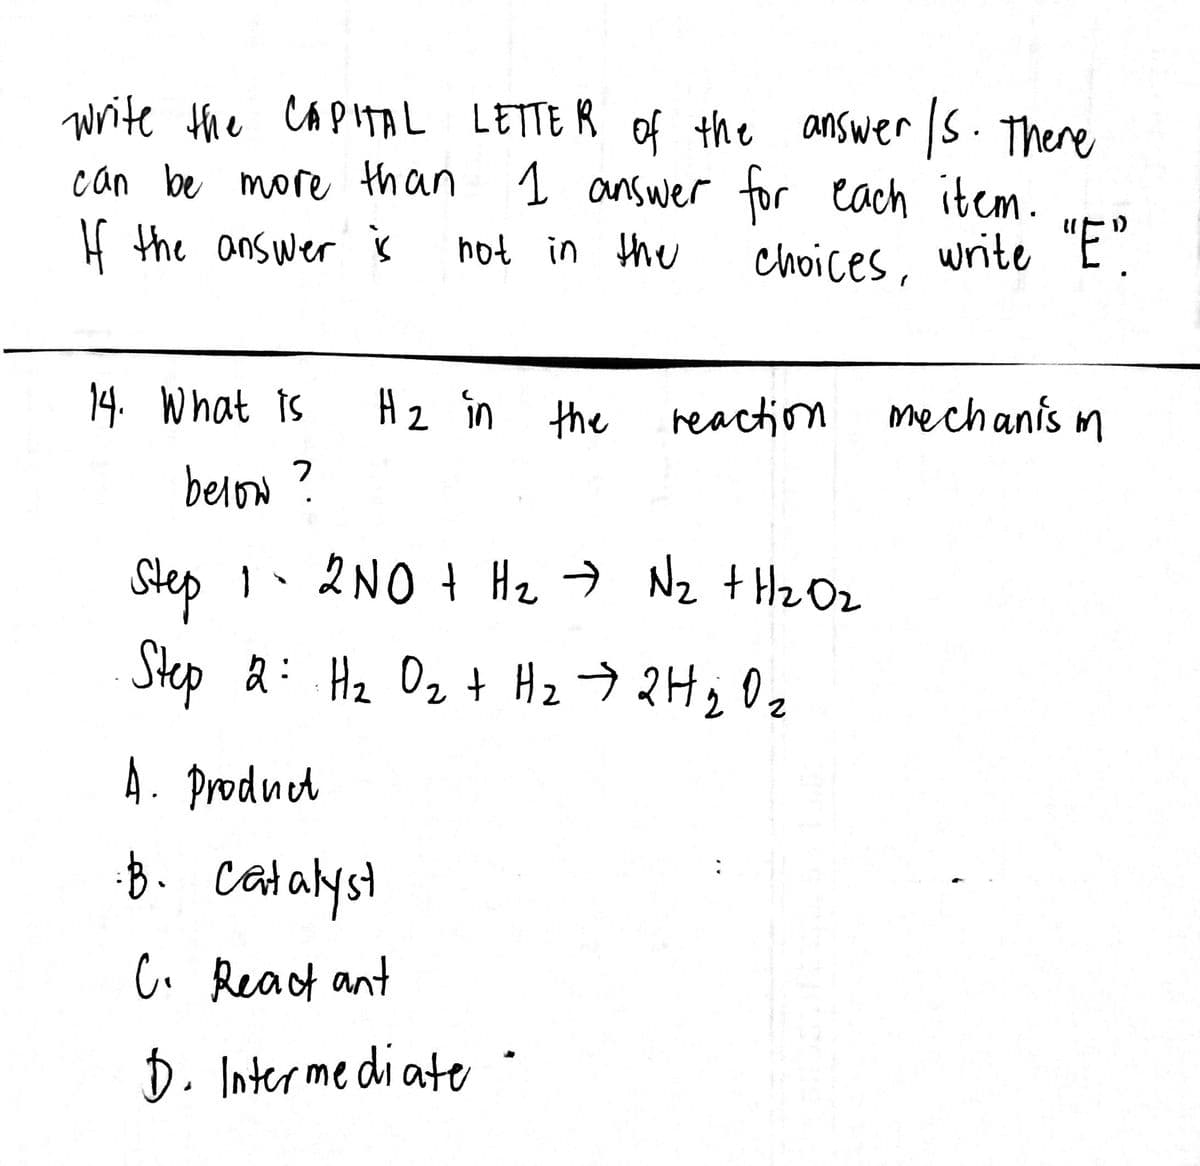 write the CAPITAL LETTER of the answer /s. There
can be more than 1 answer for each item.
If the answer is
not in the
choices, write "E"
14. What is
H₂ in the
reaction
mechanism
below ?
Step 1 - 2NO + H₂ → N₂ + H₂O₂
Step 2: H₂ O ₂ + H₂ → 2 H ₂ O ₂
2
2
A. Product
· B. catalyst
C. React ant
D. Intermediate